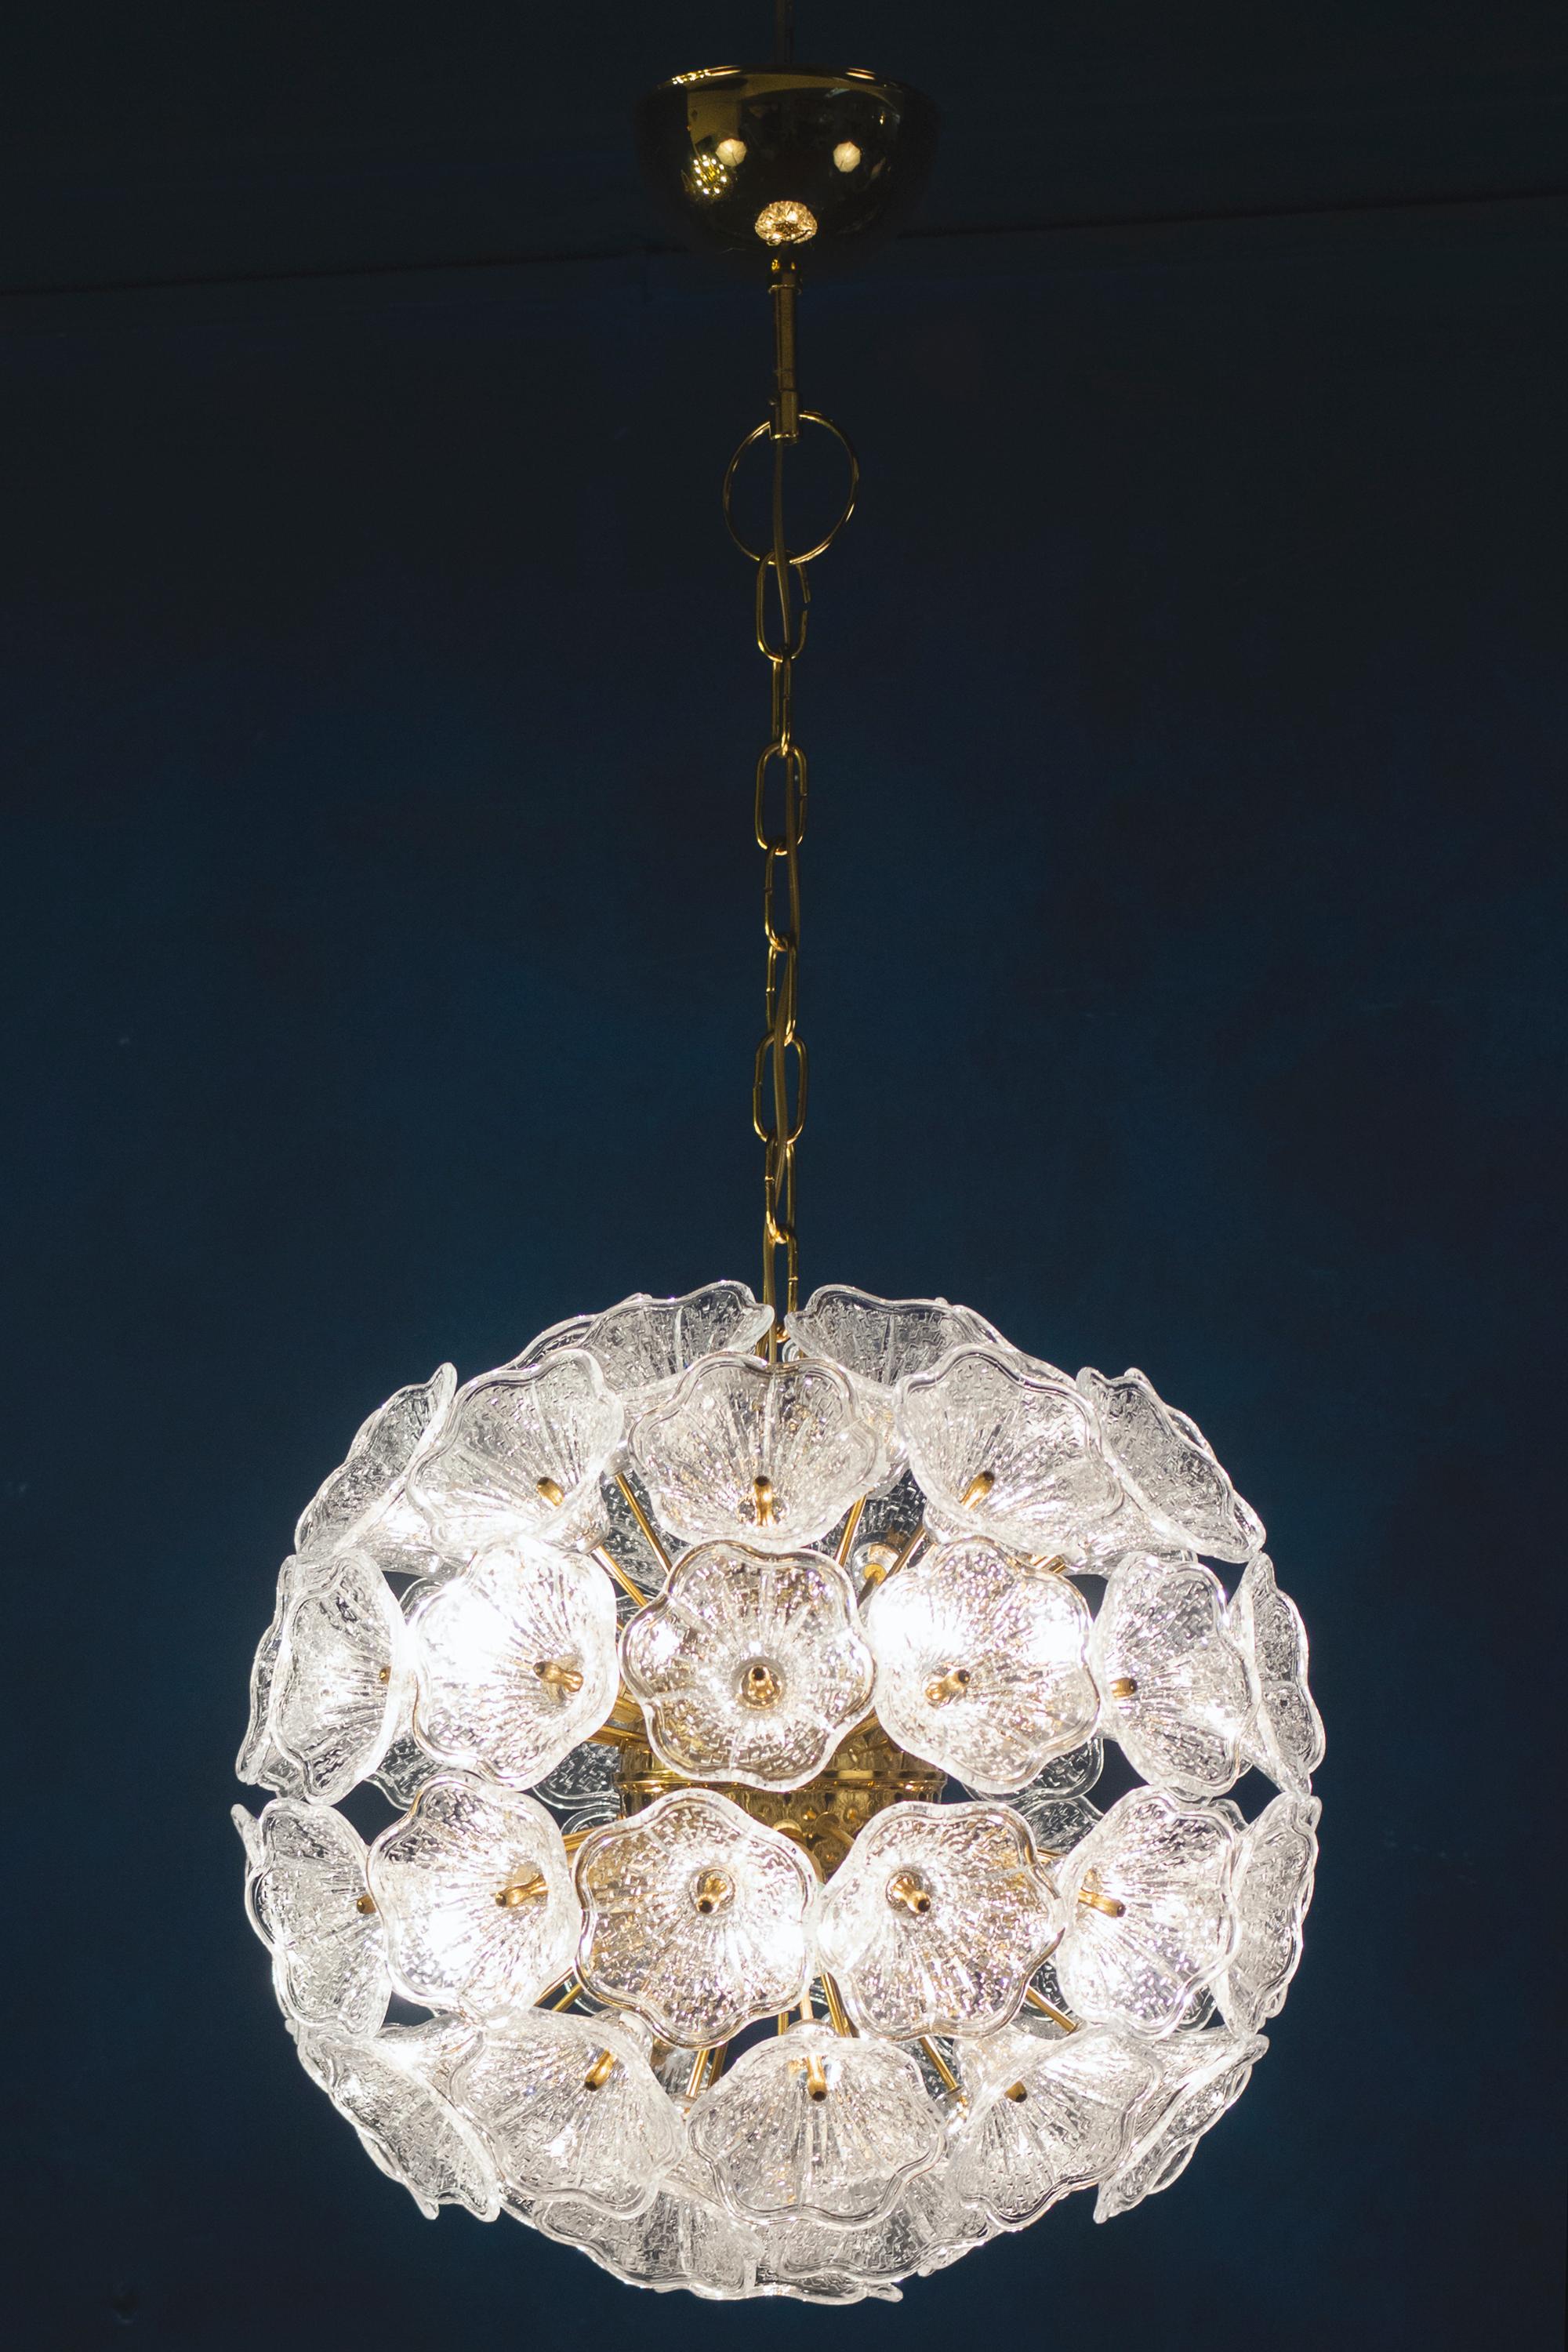 Sputnik Flower Murano glass chandelier by Paolo Venini for VeArt, Italy. Covered in molded ice structure glass flower on a brass Sputnik frame. 
A beautiful clear natural look like a jewel in your living room. In good original condition with minor